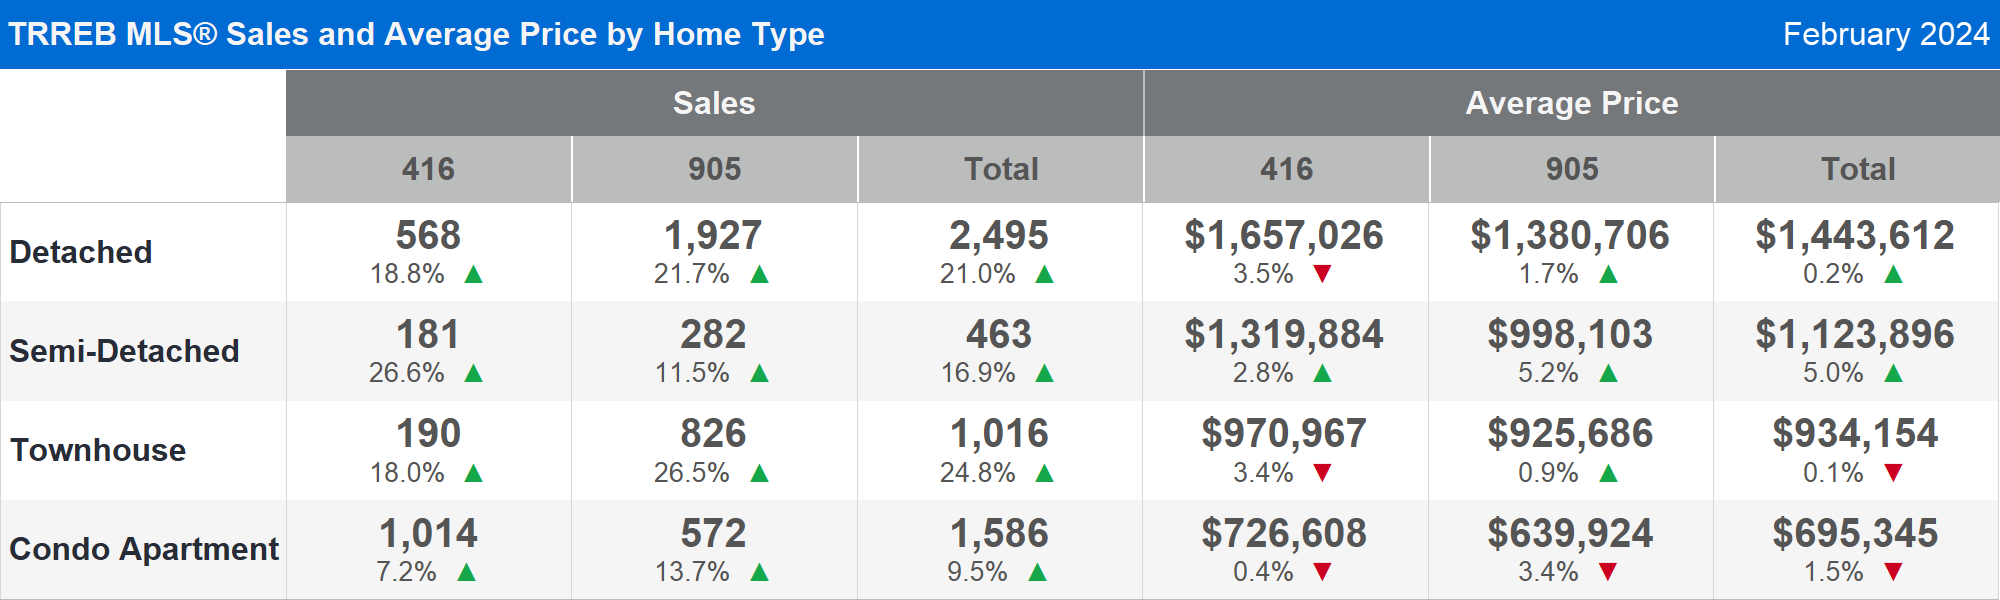 TRREB MLS® Sales and Average Price by Home